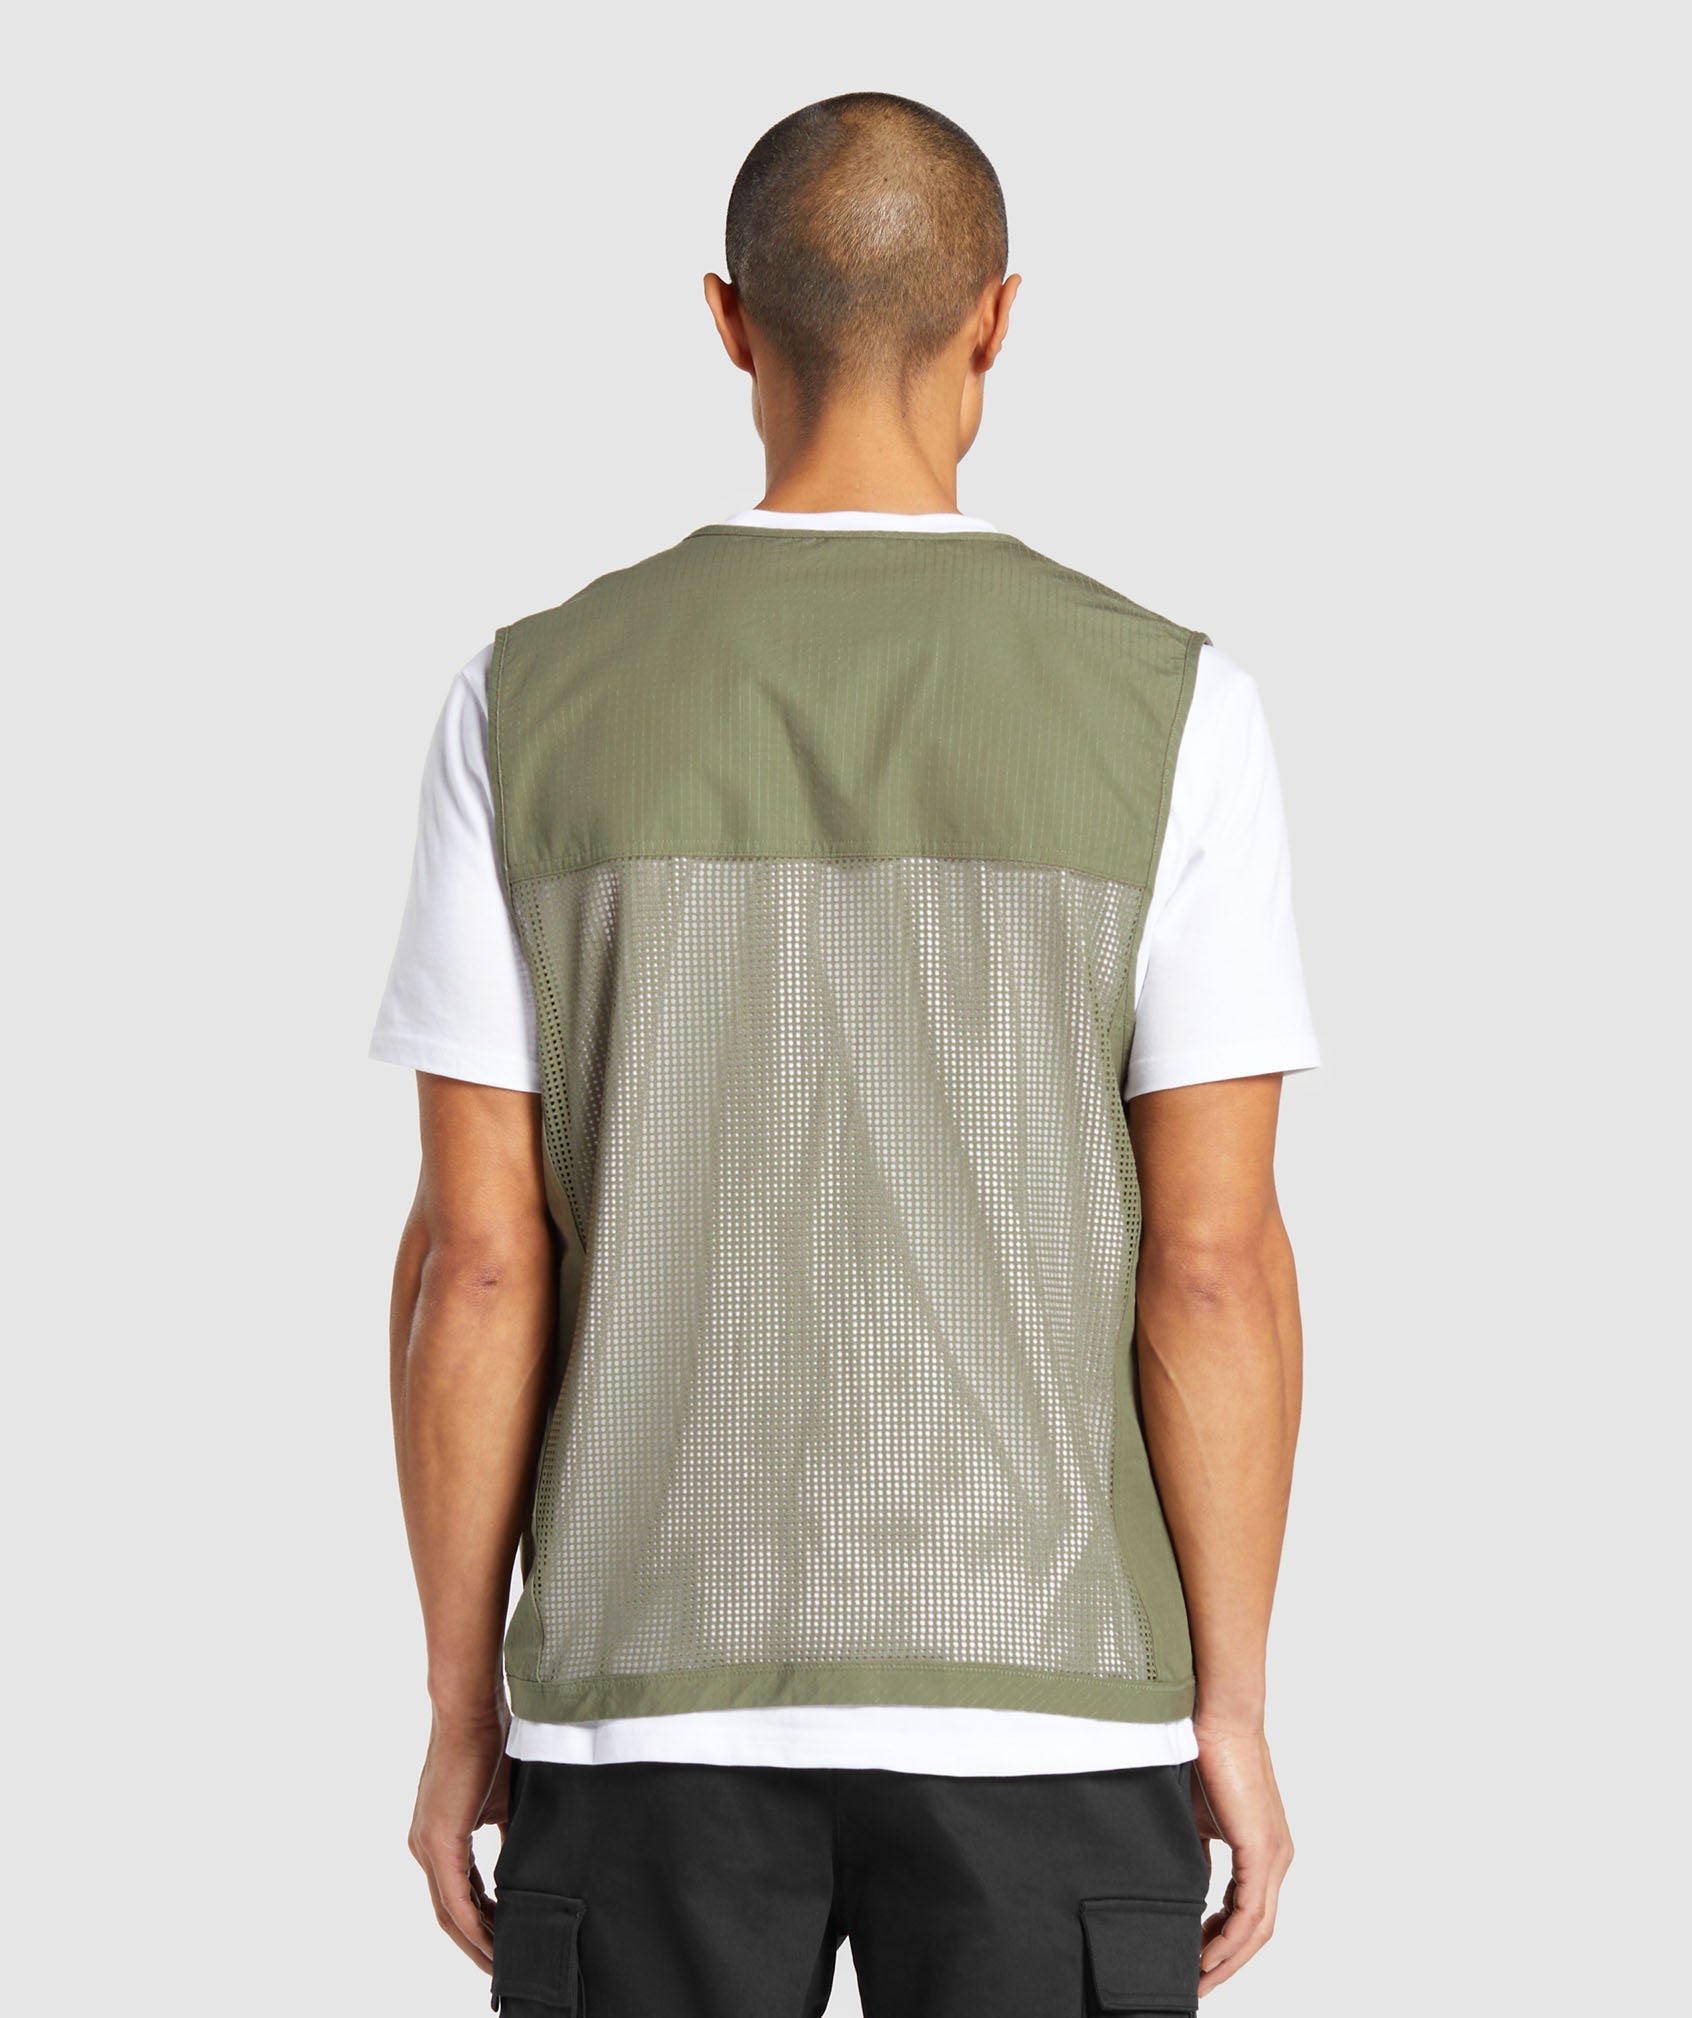 Woven Vest in Utility Green - view 2